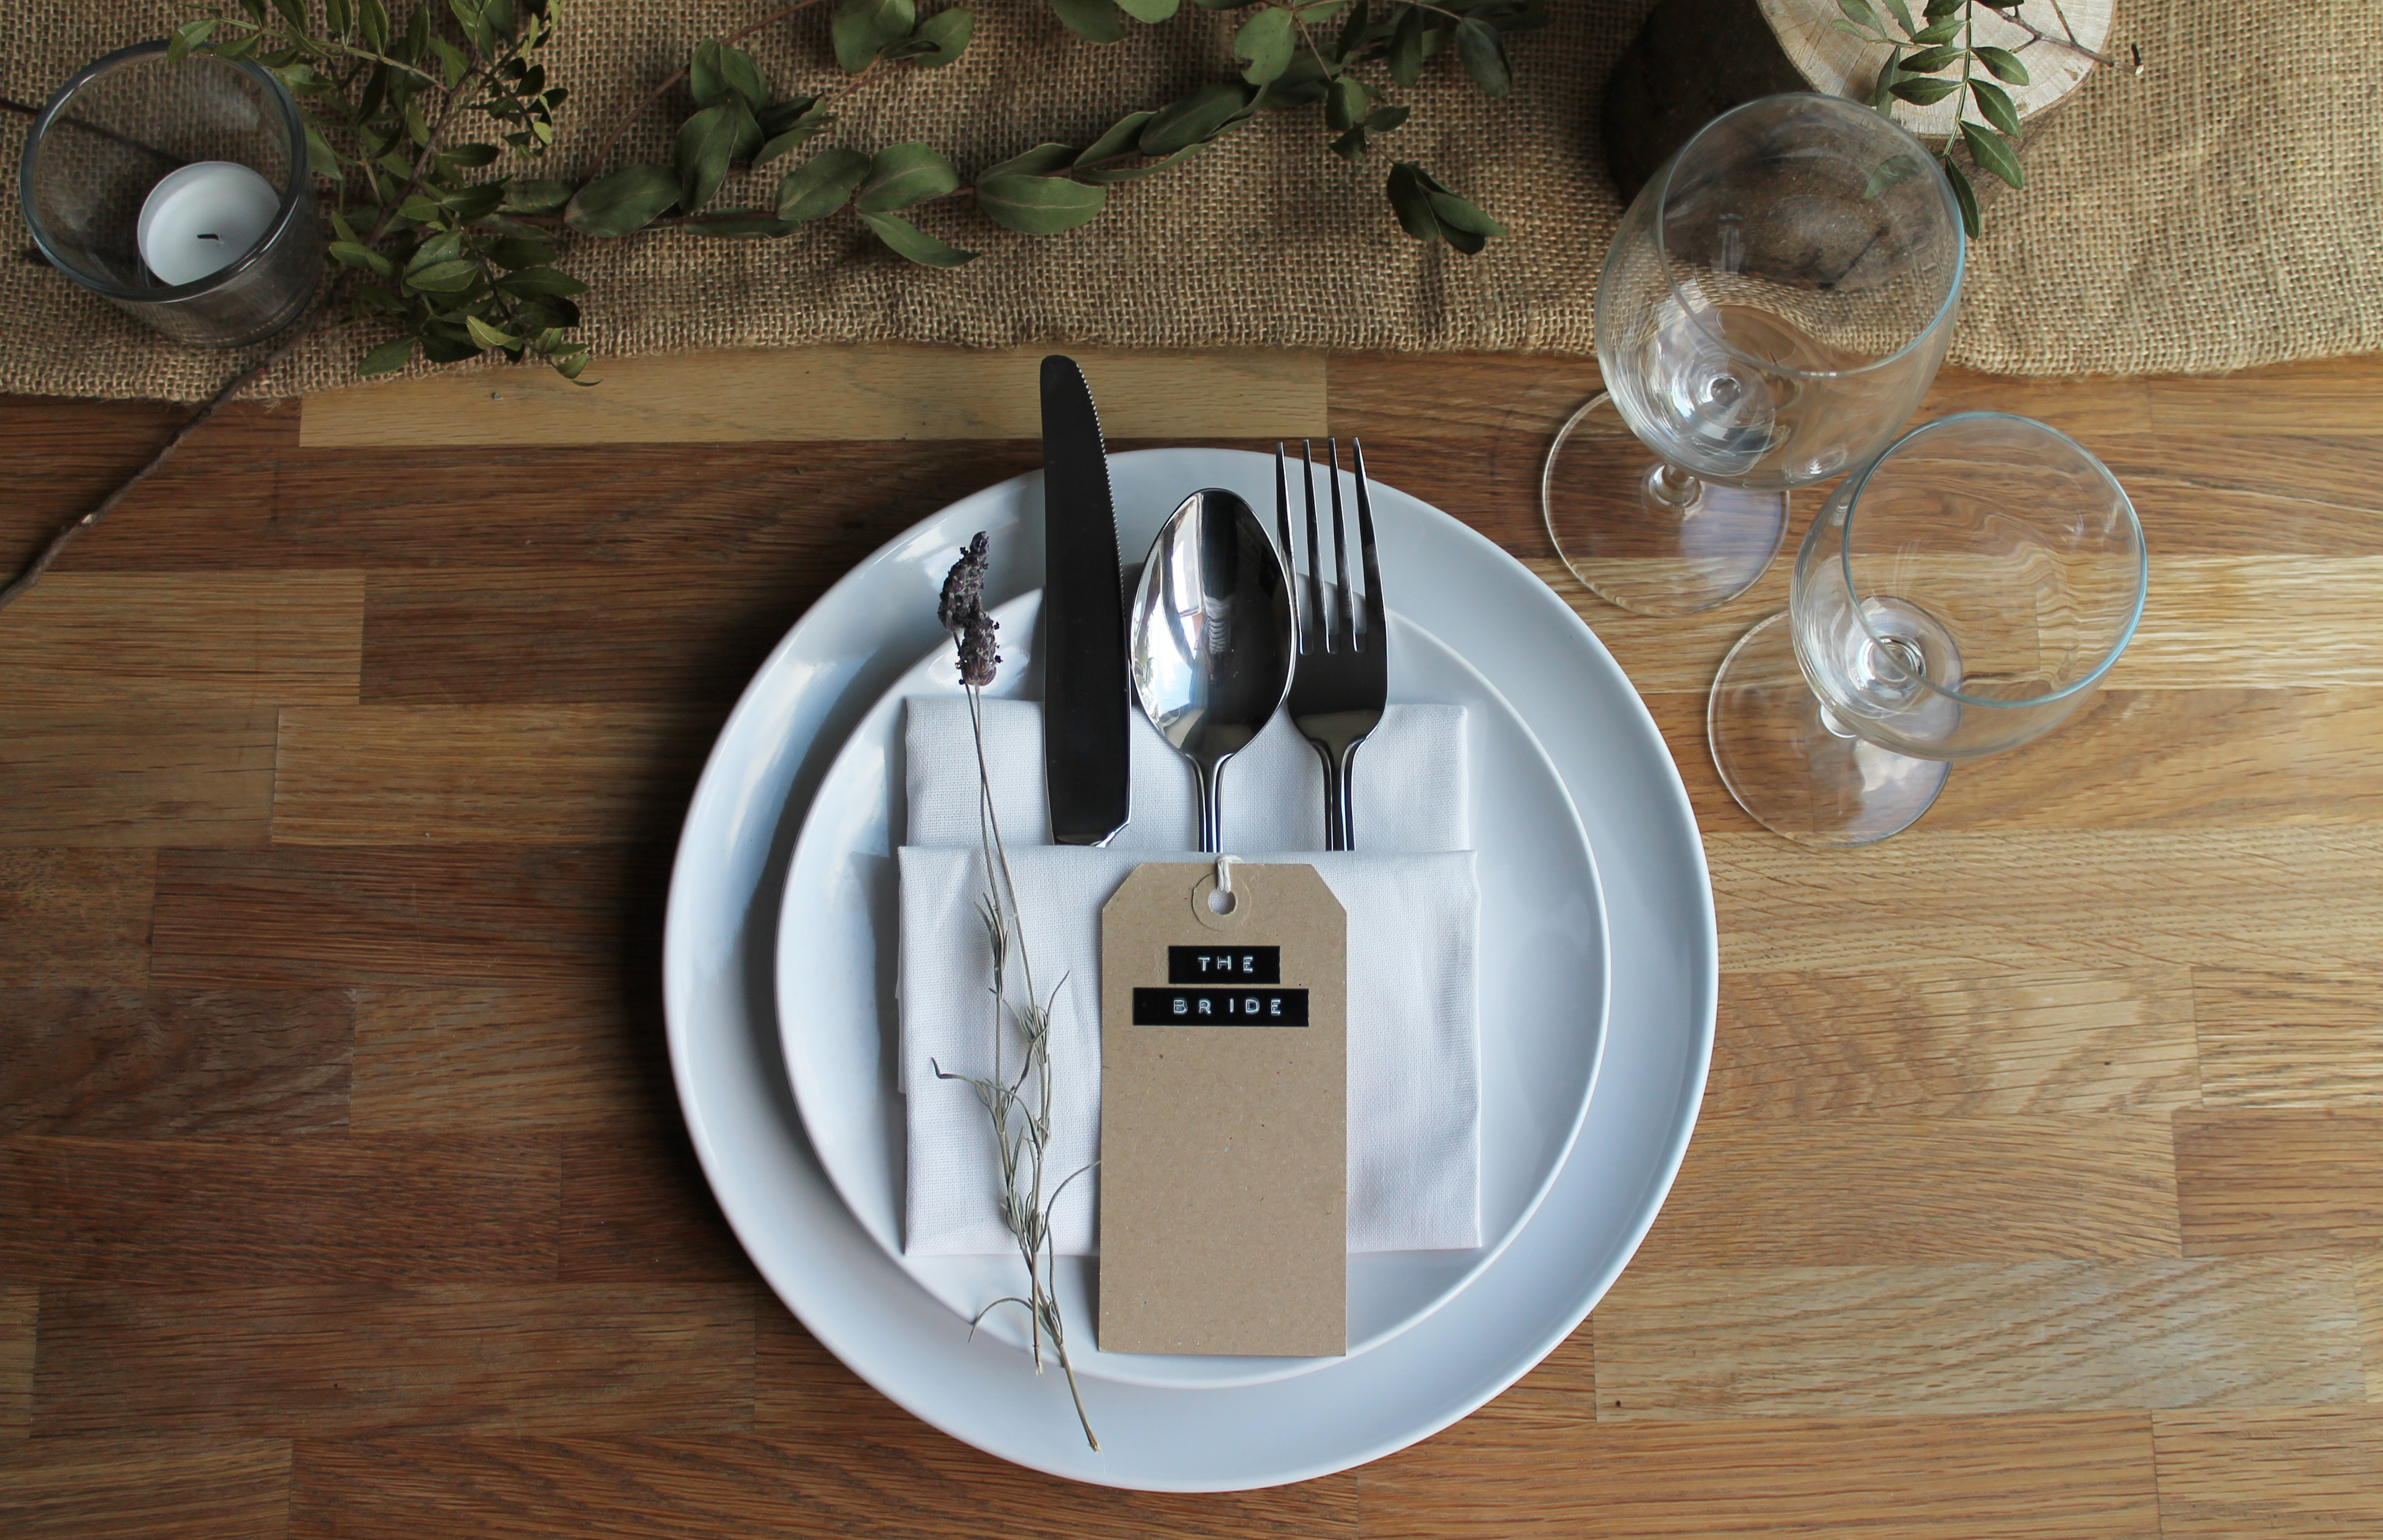 5 RUSTIC PLACE SETTING IDEAS. | the little lending company